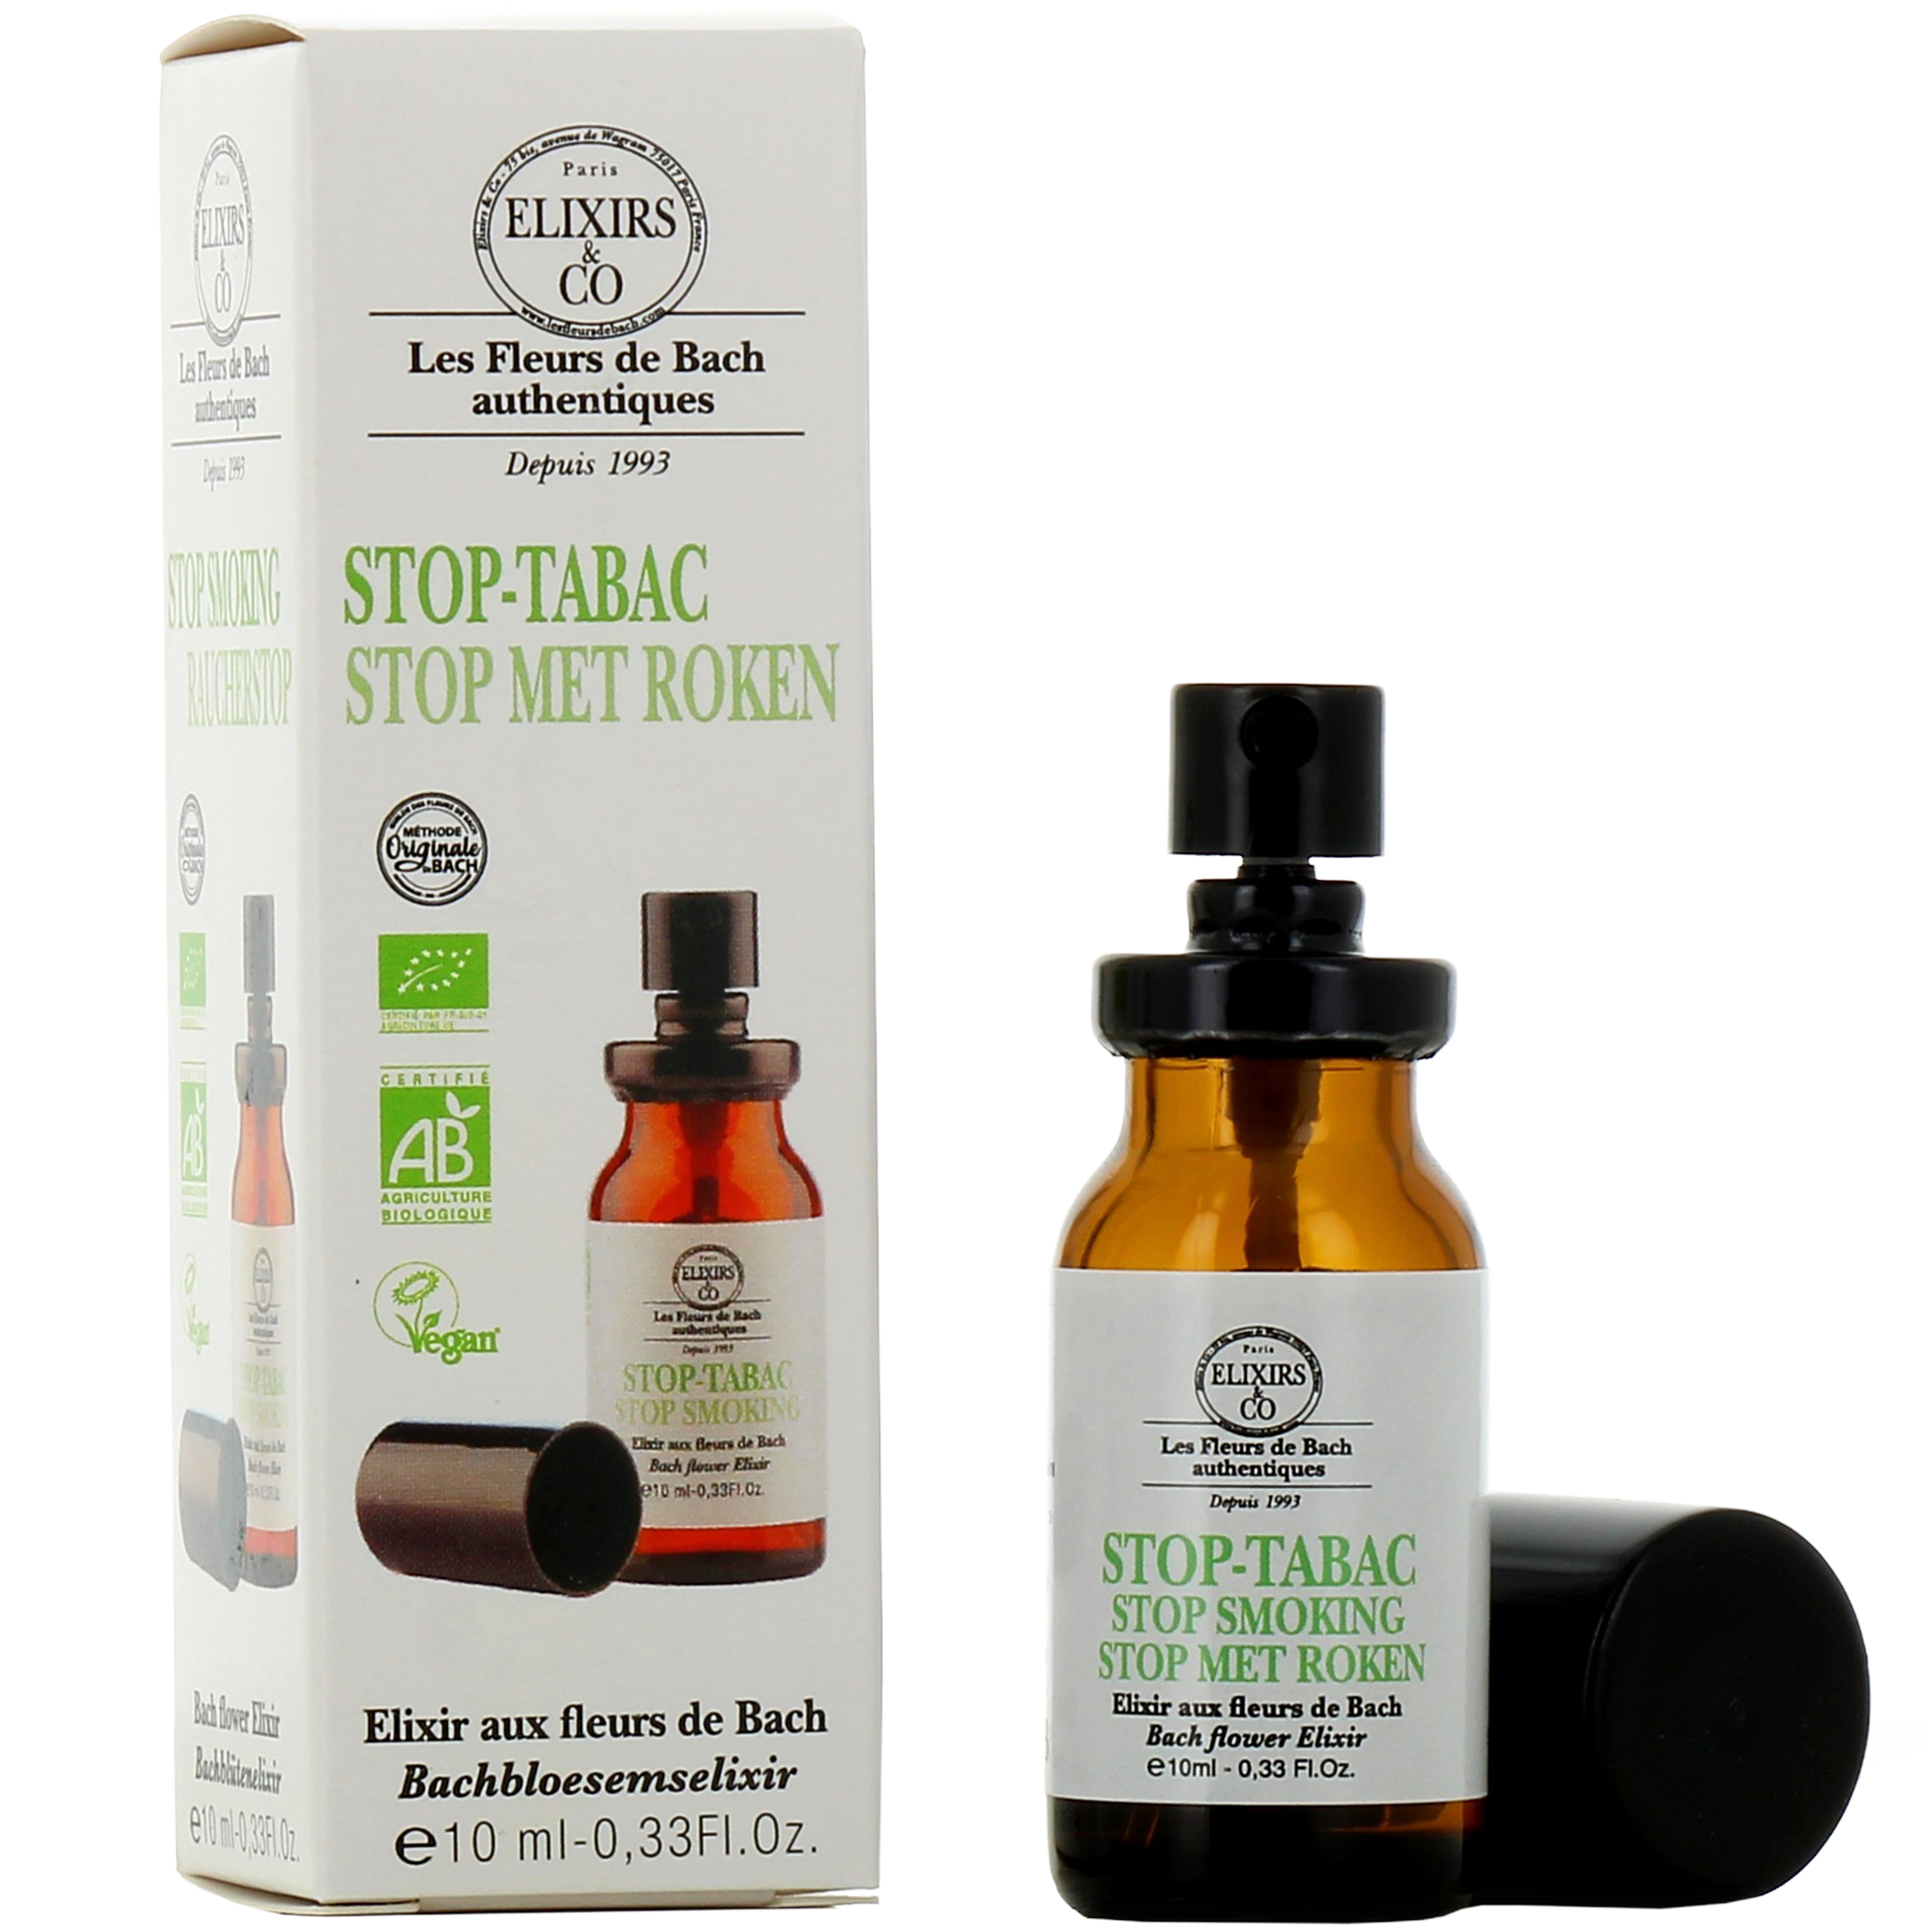 https://cdn.pharmaciedesdrakkars.com/media/images/products/elixirs-co-stop-tabac-elixirs-and-co8-1696412701.jpg